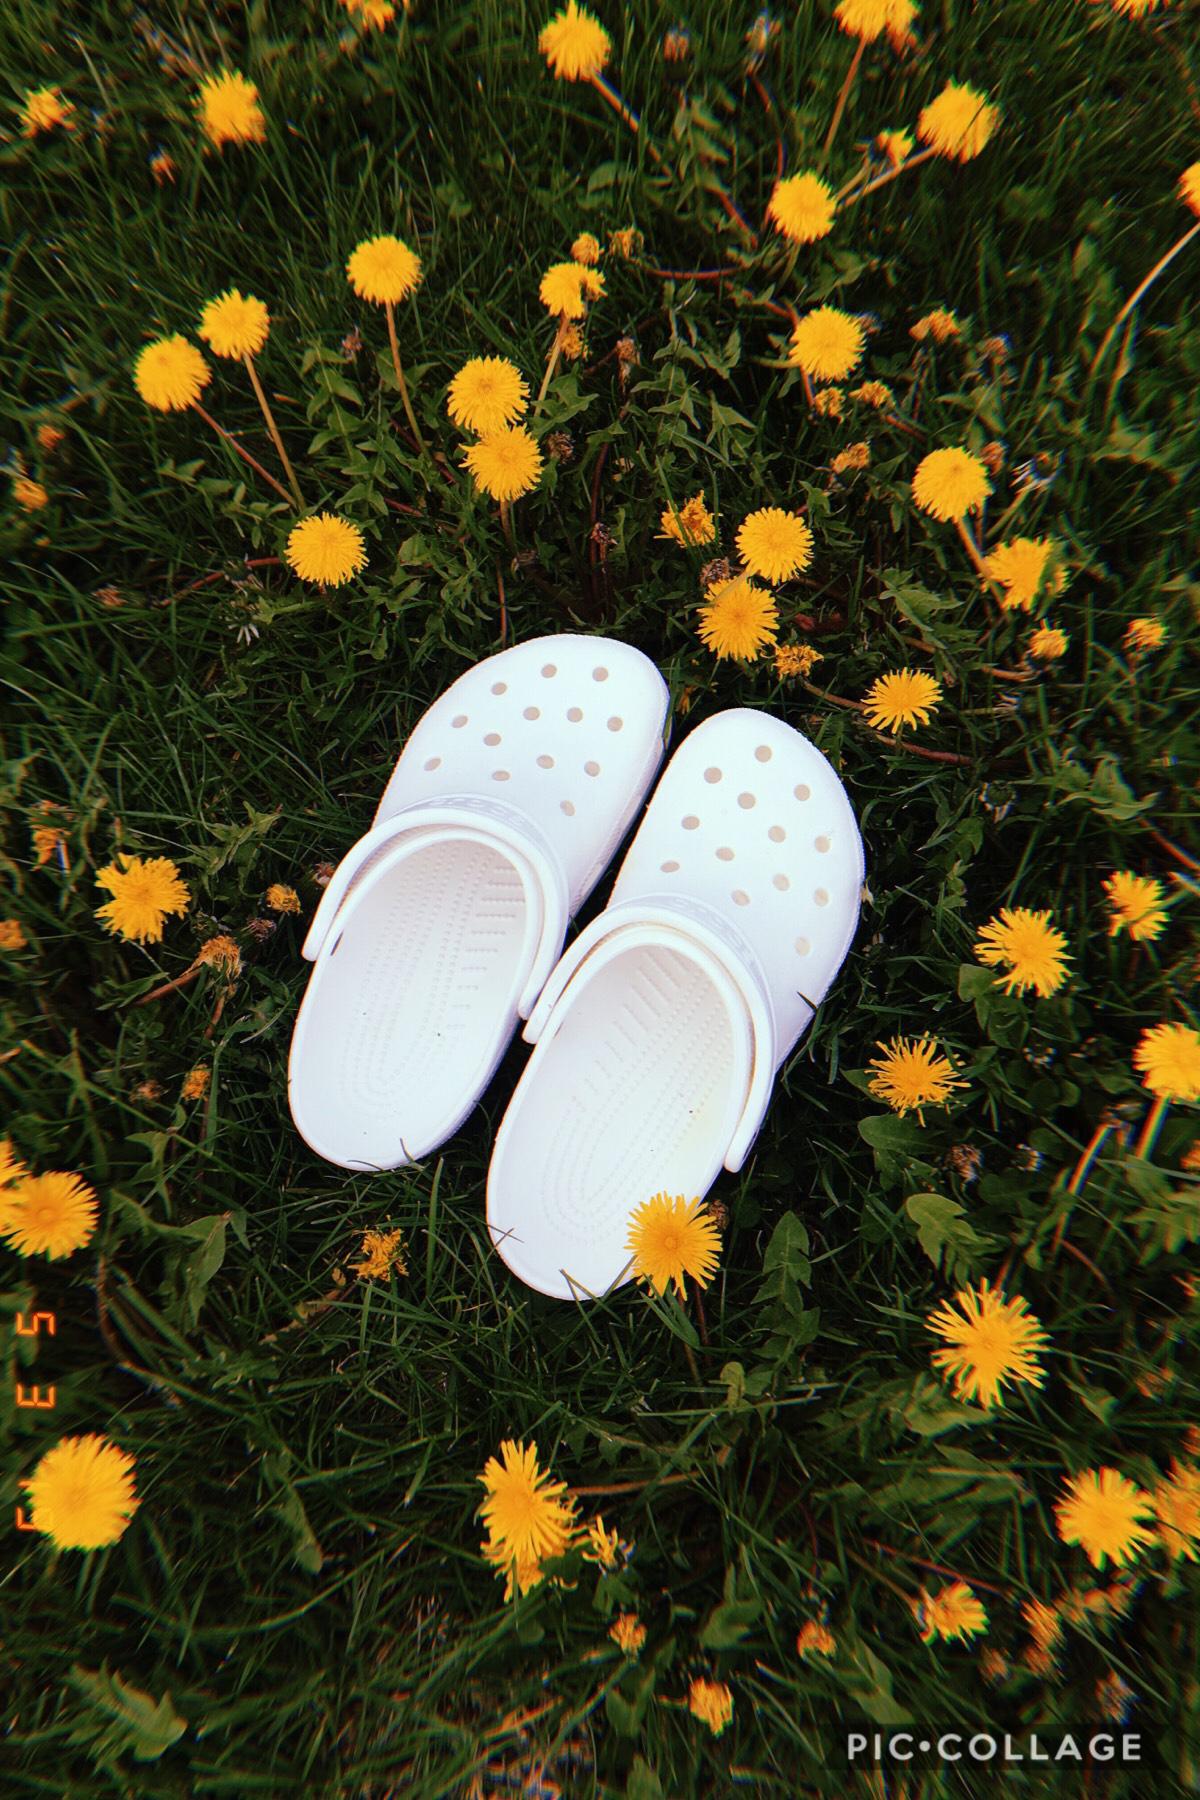 •tApPiTy•
(5/3/19)
uhm sry i haven’t posted for a longgggg time😬
but uh..
I GOT CROCS🤪
anyway, i’ll prob just be posting some of my photography for a lil bit ig idk
QOTD: who’s ur fav youtuber?
AOTD: Emma Chamberlain or Cody Ko